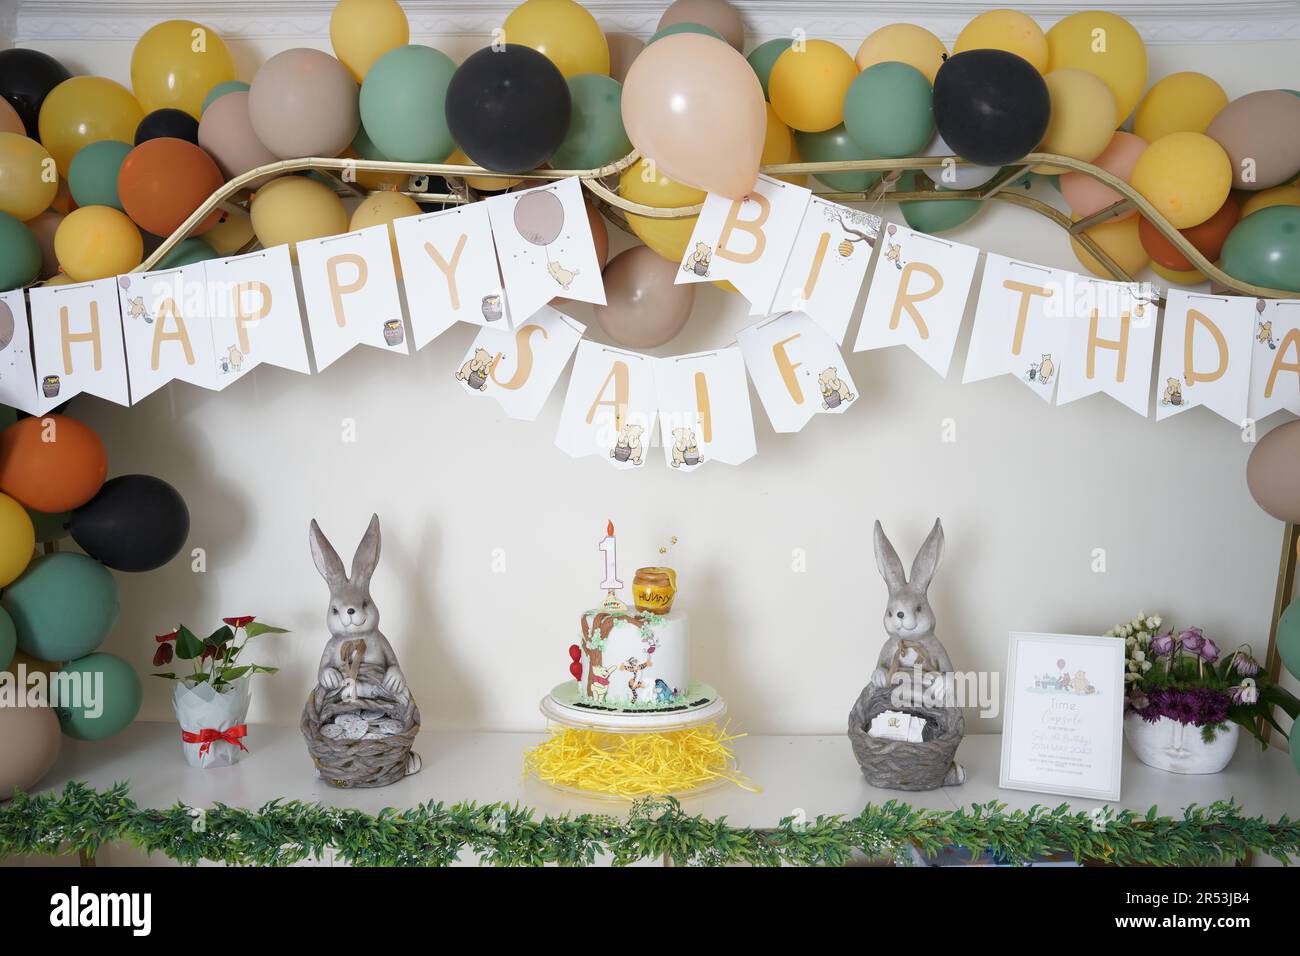 Kids Winnie the pooh birthday party. birthday party boy theme decoration, cake art with table and festive Stock Photo